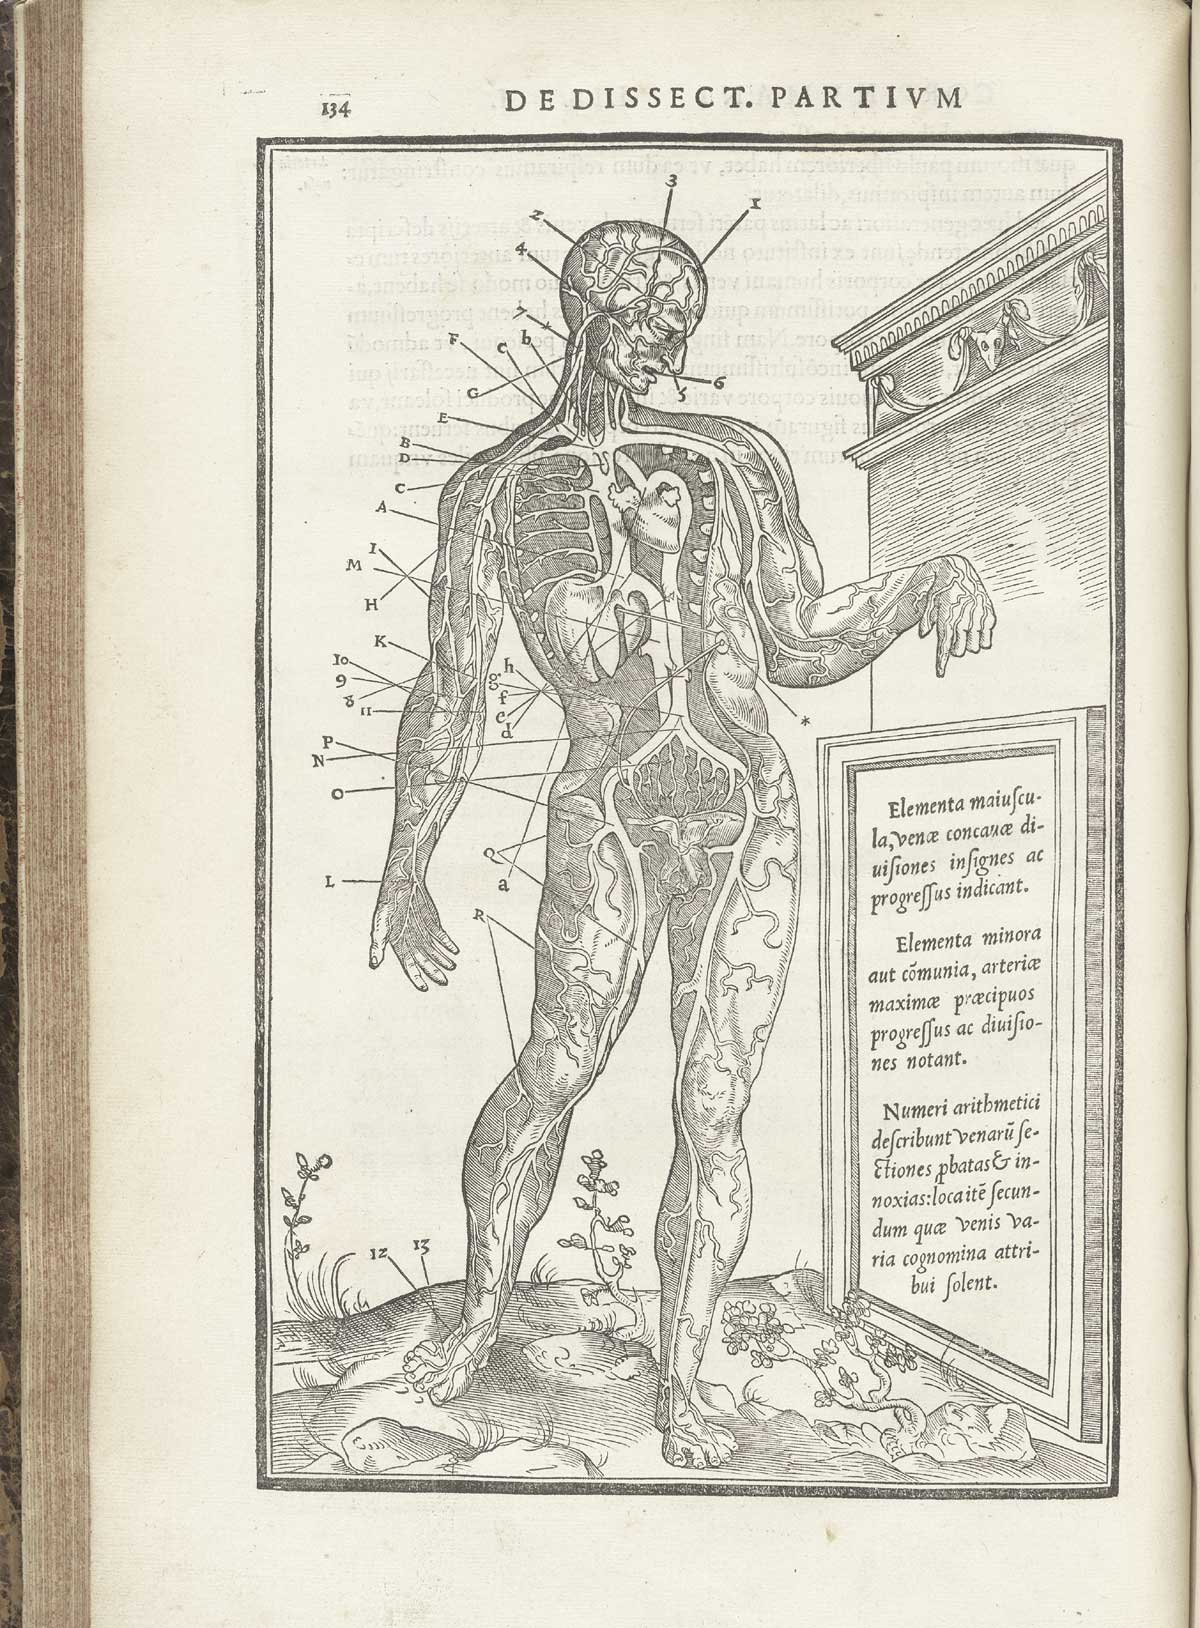 Woodcut venous figure standing on a marble column base in a pastoral setting, facing the viewer with his left hand pointing to a marble stele with text in Latin describing the venous structures which are exposed on the figure, including heart, liver and major veins and arteries throughout the body, with index letters surrounding him pointing to numerous structures, from Charles Estienne’s De dissection partium corporis humani libri tres, NLM Call no.: WZ 240 E81dd 1545.